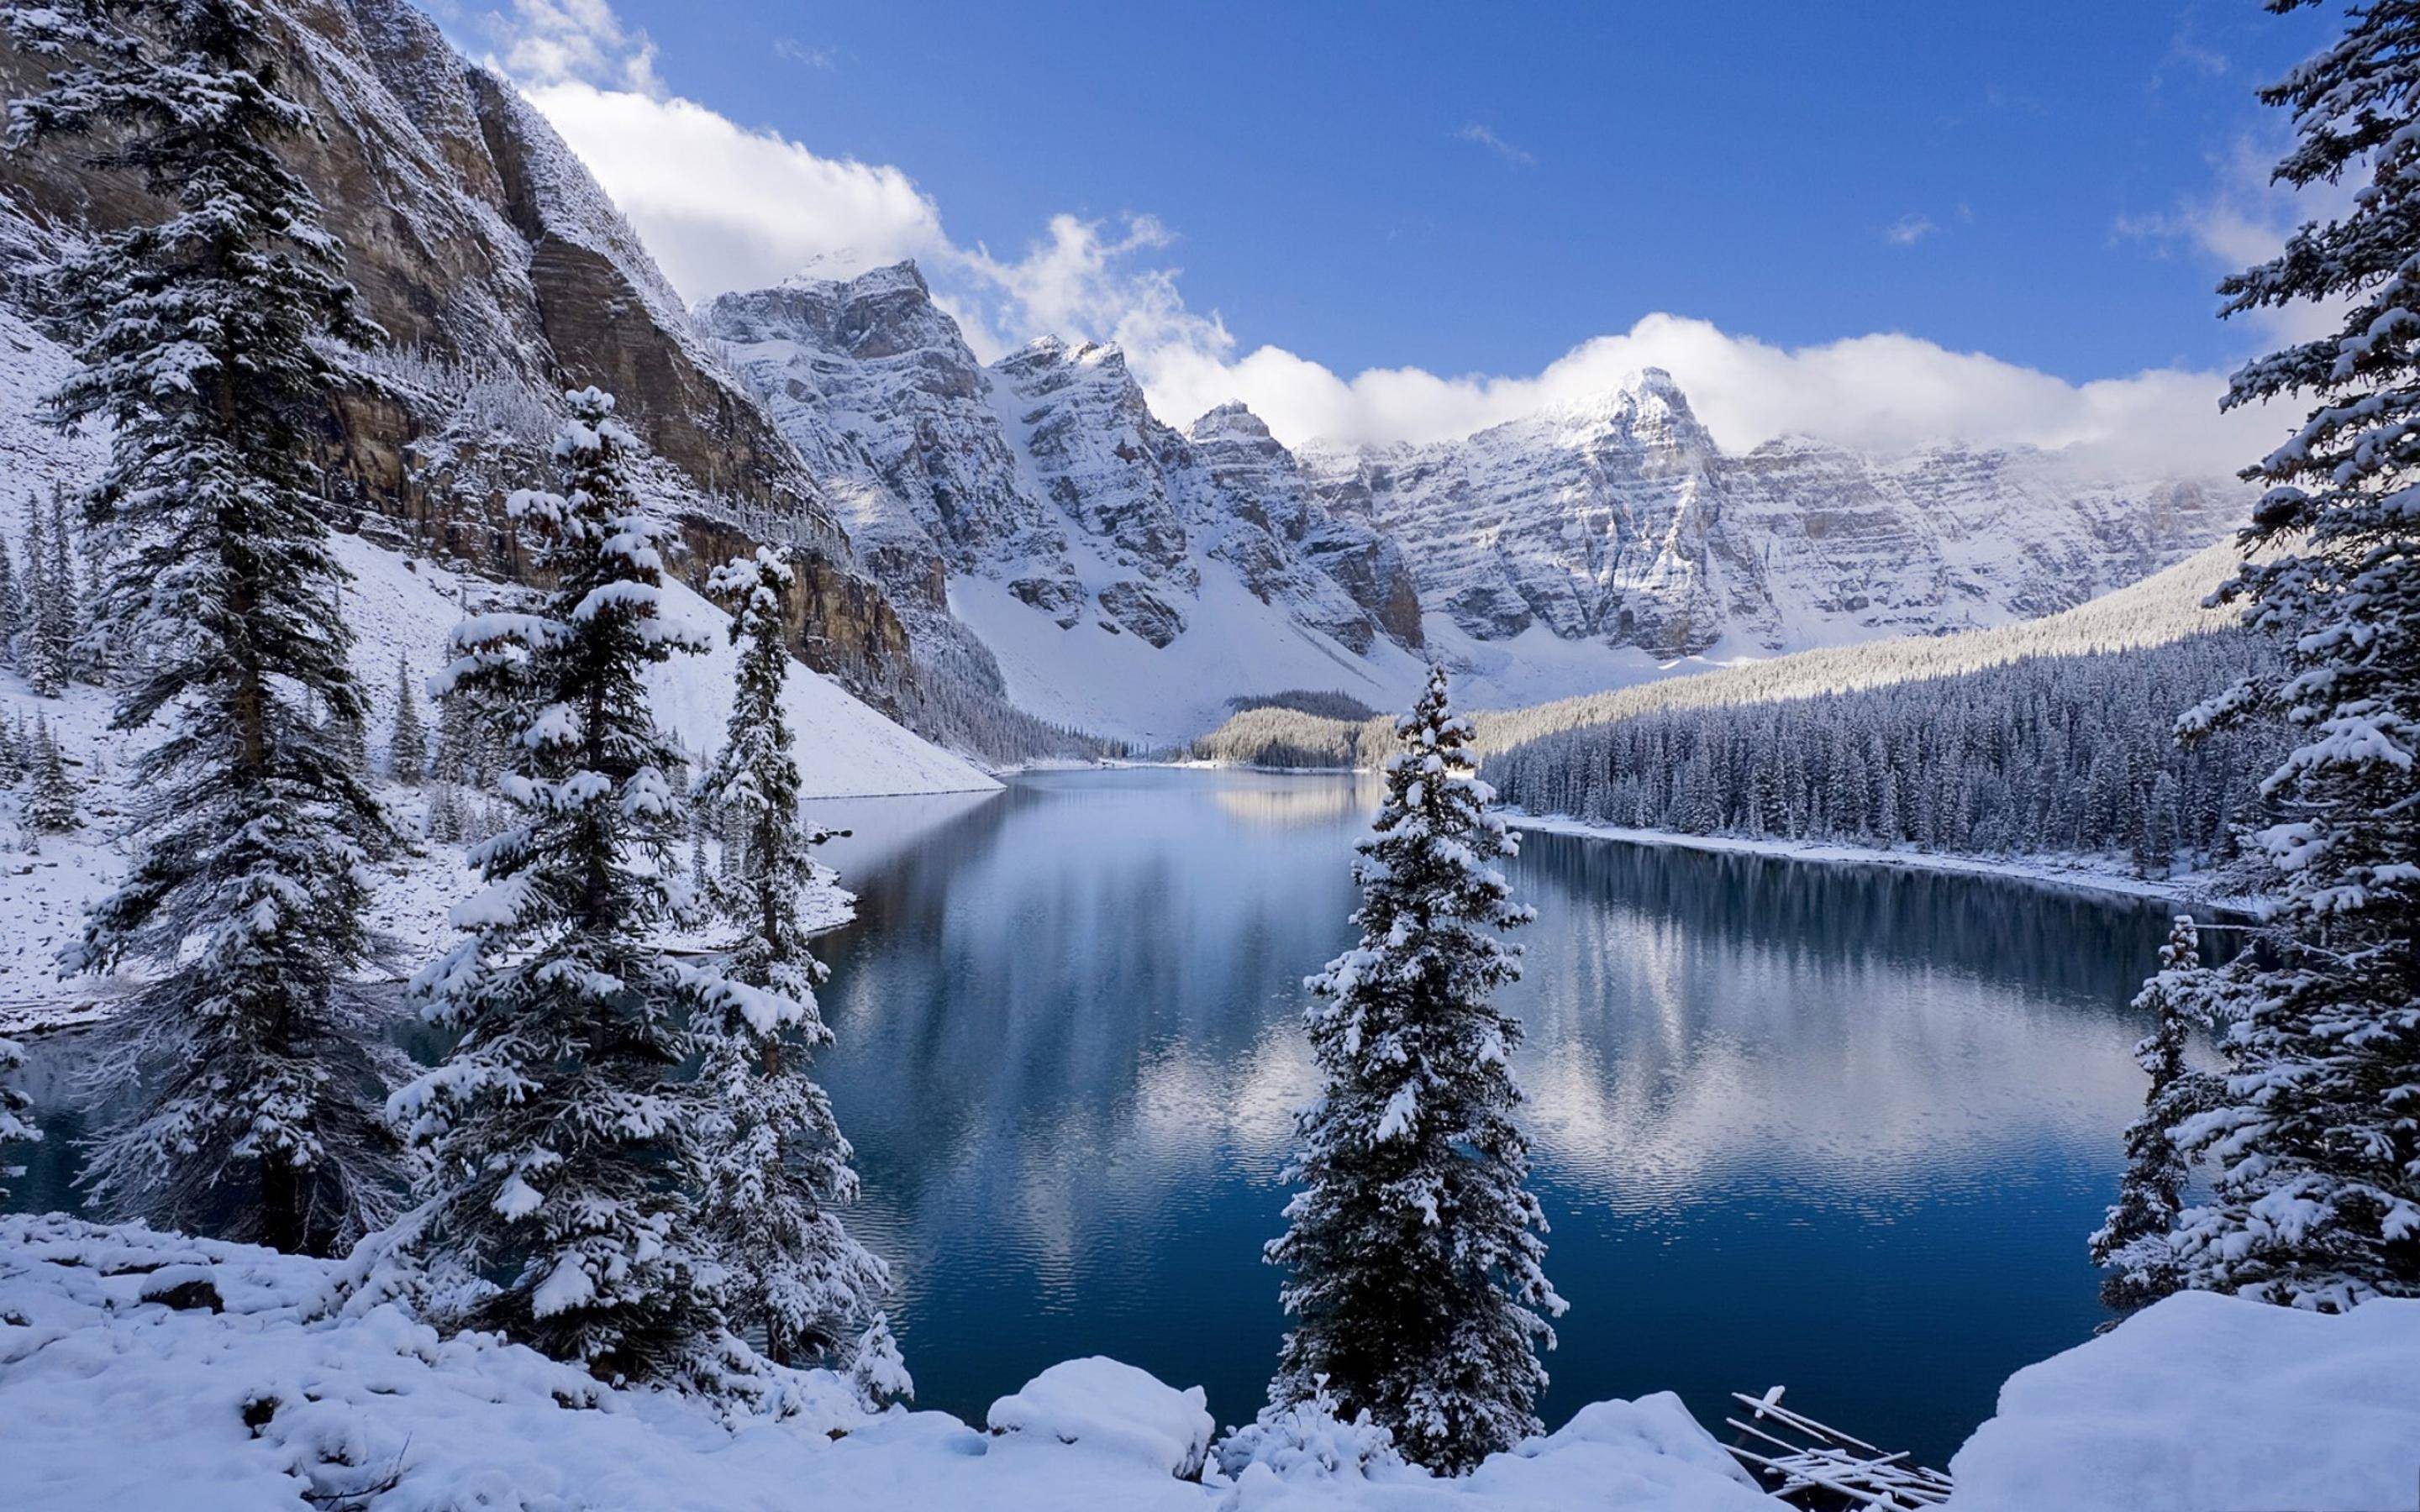 General 2880x1800 nature winter snow Moraine Lake Canada snowy peak ice cold outdoors lake Banff National Park